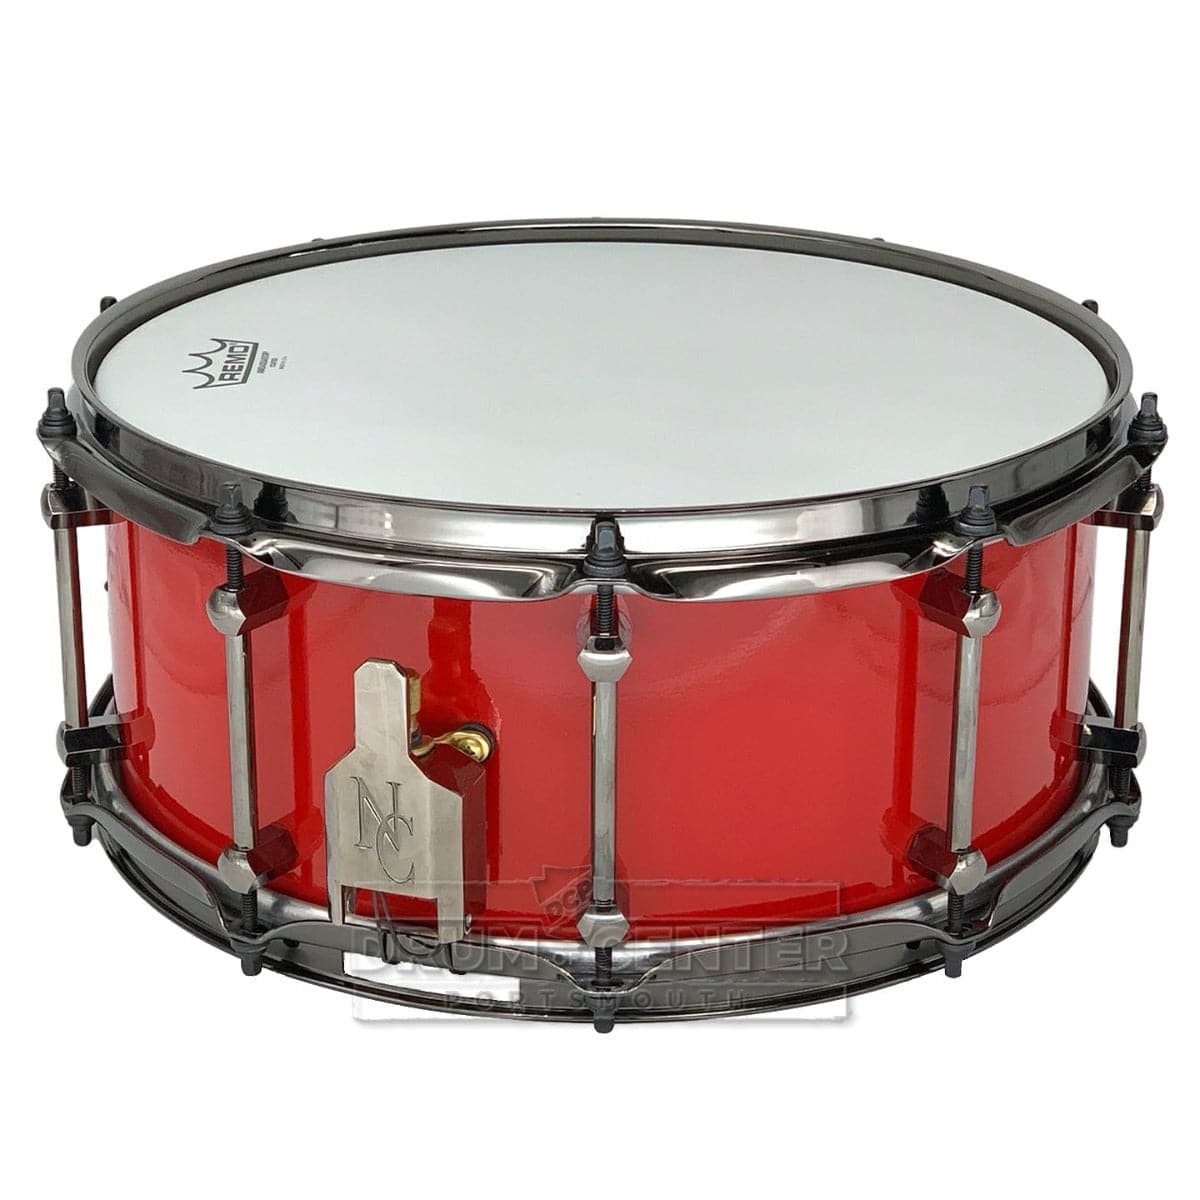 Noble & Cooley Alloy Classic Painted Snare Drum 14x6 Fire Engine Red w/Black Hw